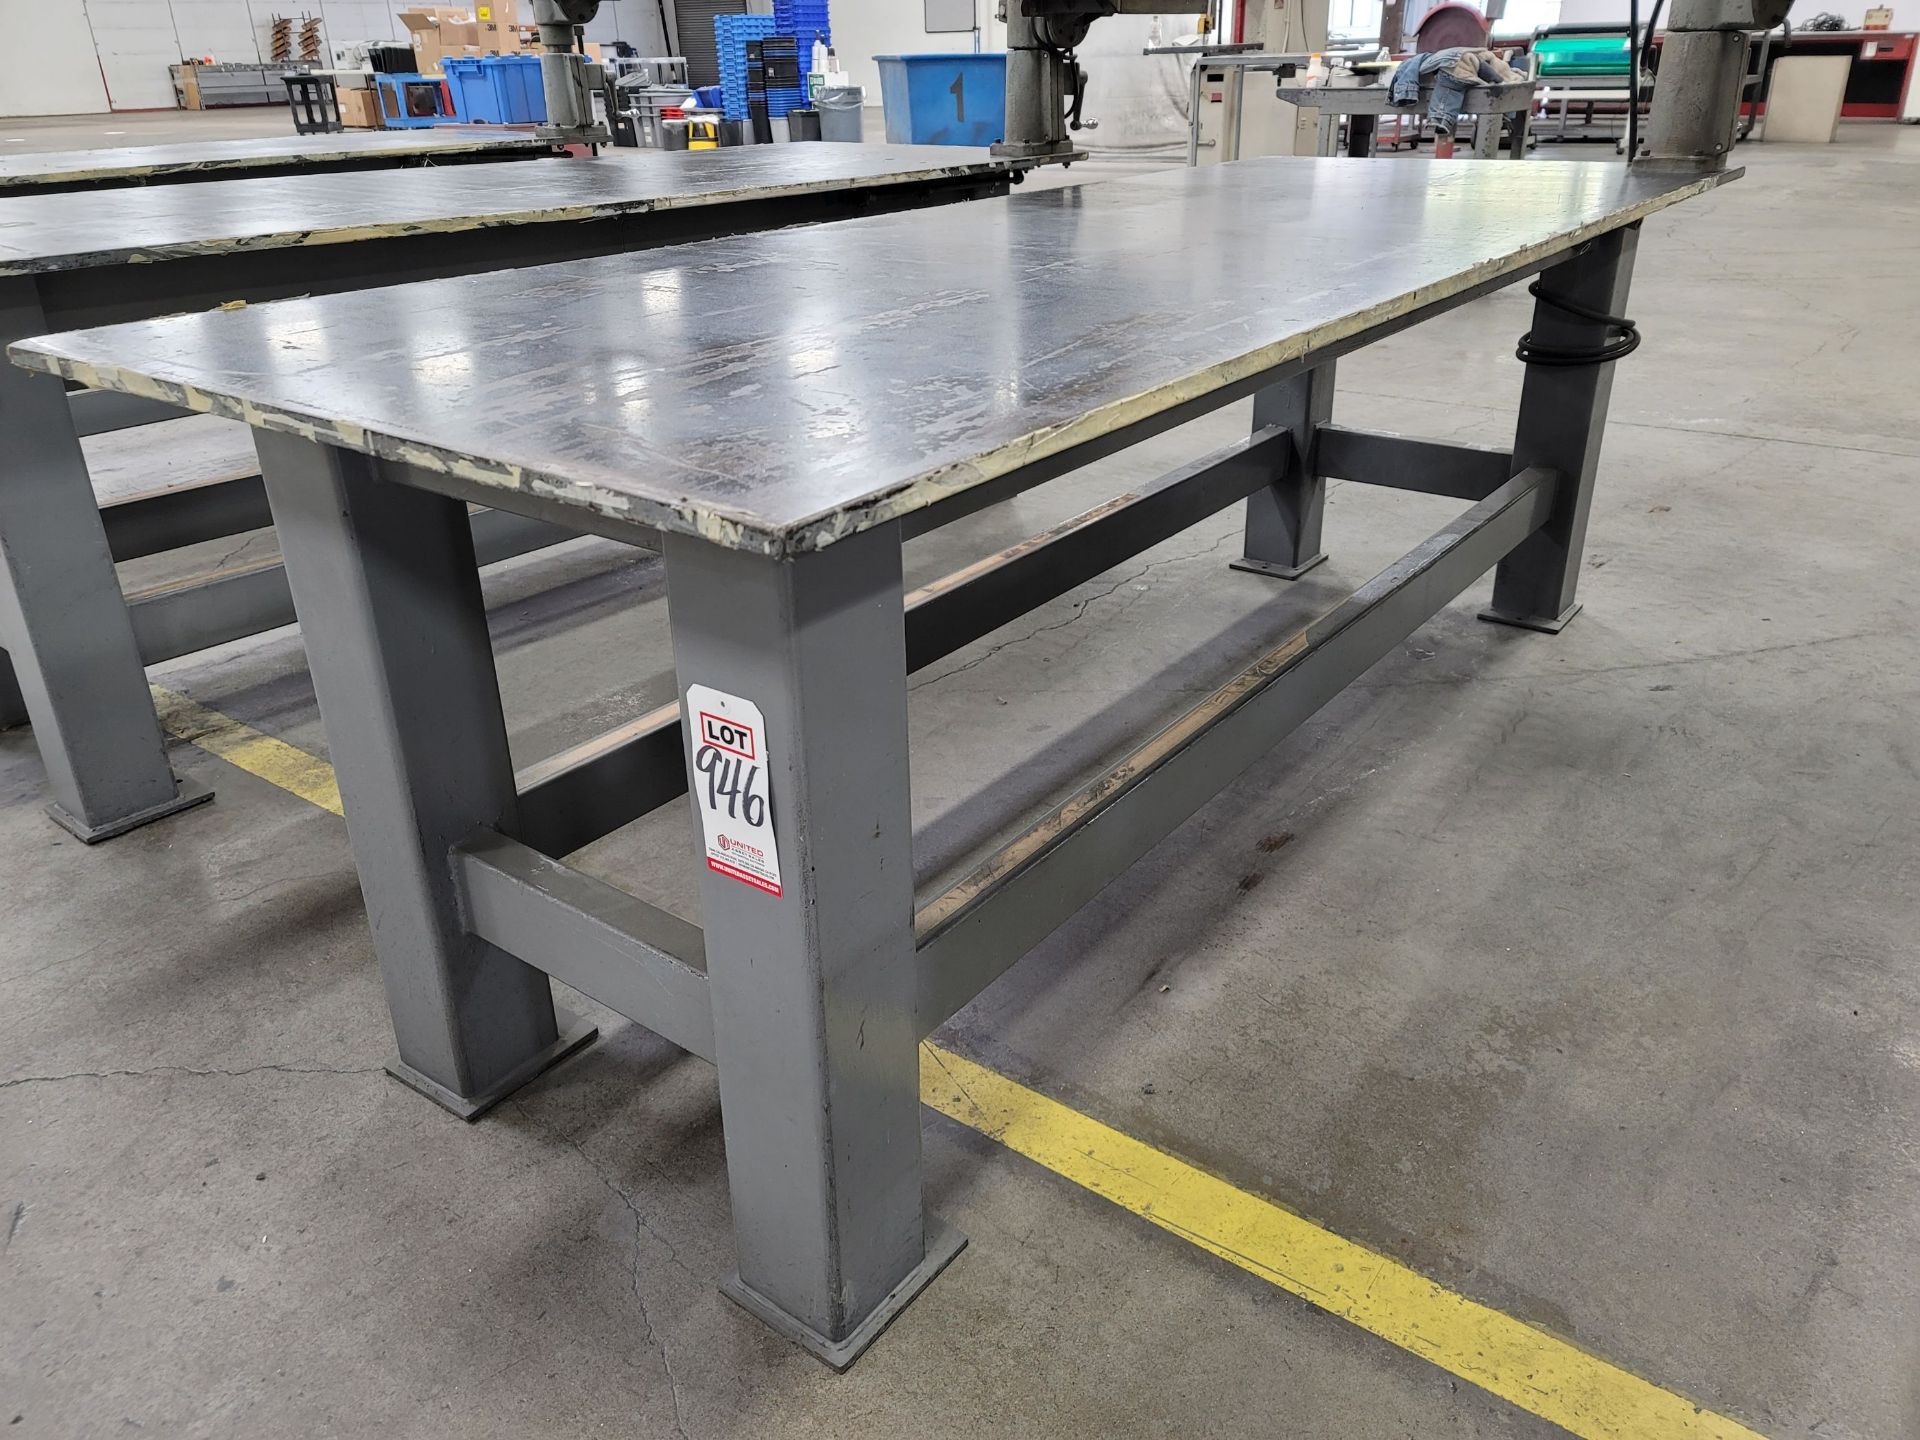 STEEL WELDING/FABRICATION TABLE W/ 3' X 8' X 3/4" STEEL TOP, ATTACHED DRILL PRESS IS NOT INCLUDED